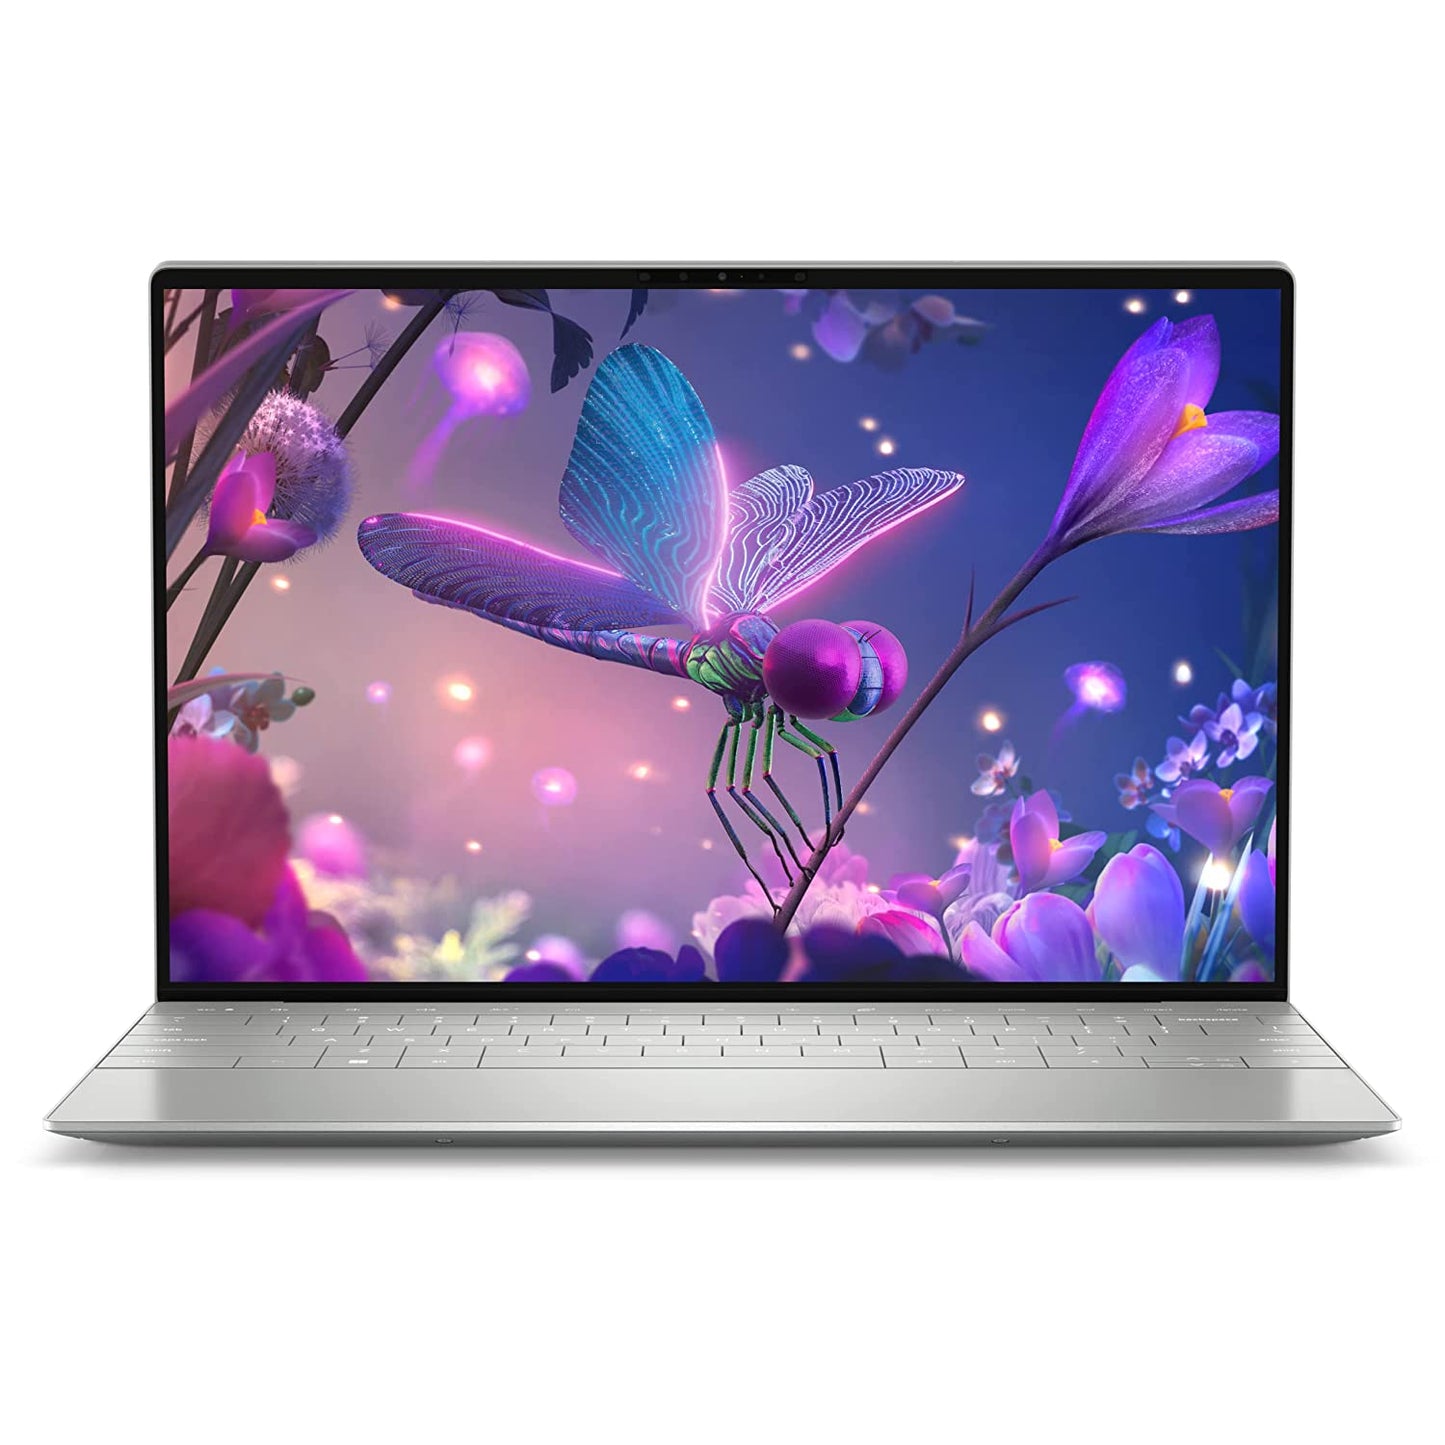 Dell XPS 13 Plus Laptop Intel i5-1240P 16GB LP DDR5 & 512GB SSD Win 11 + Office H&S 2021 13.4" UDH+ AR Infinity Edge 500 nits Touch Backlit Keyboard Fingerprint Reader Platinum D560072WIN9S